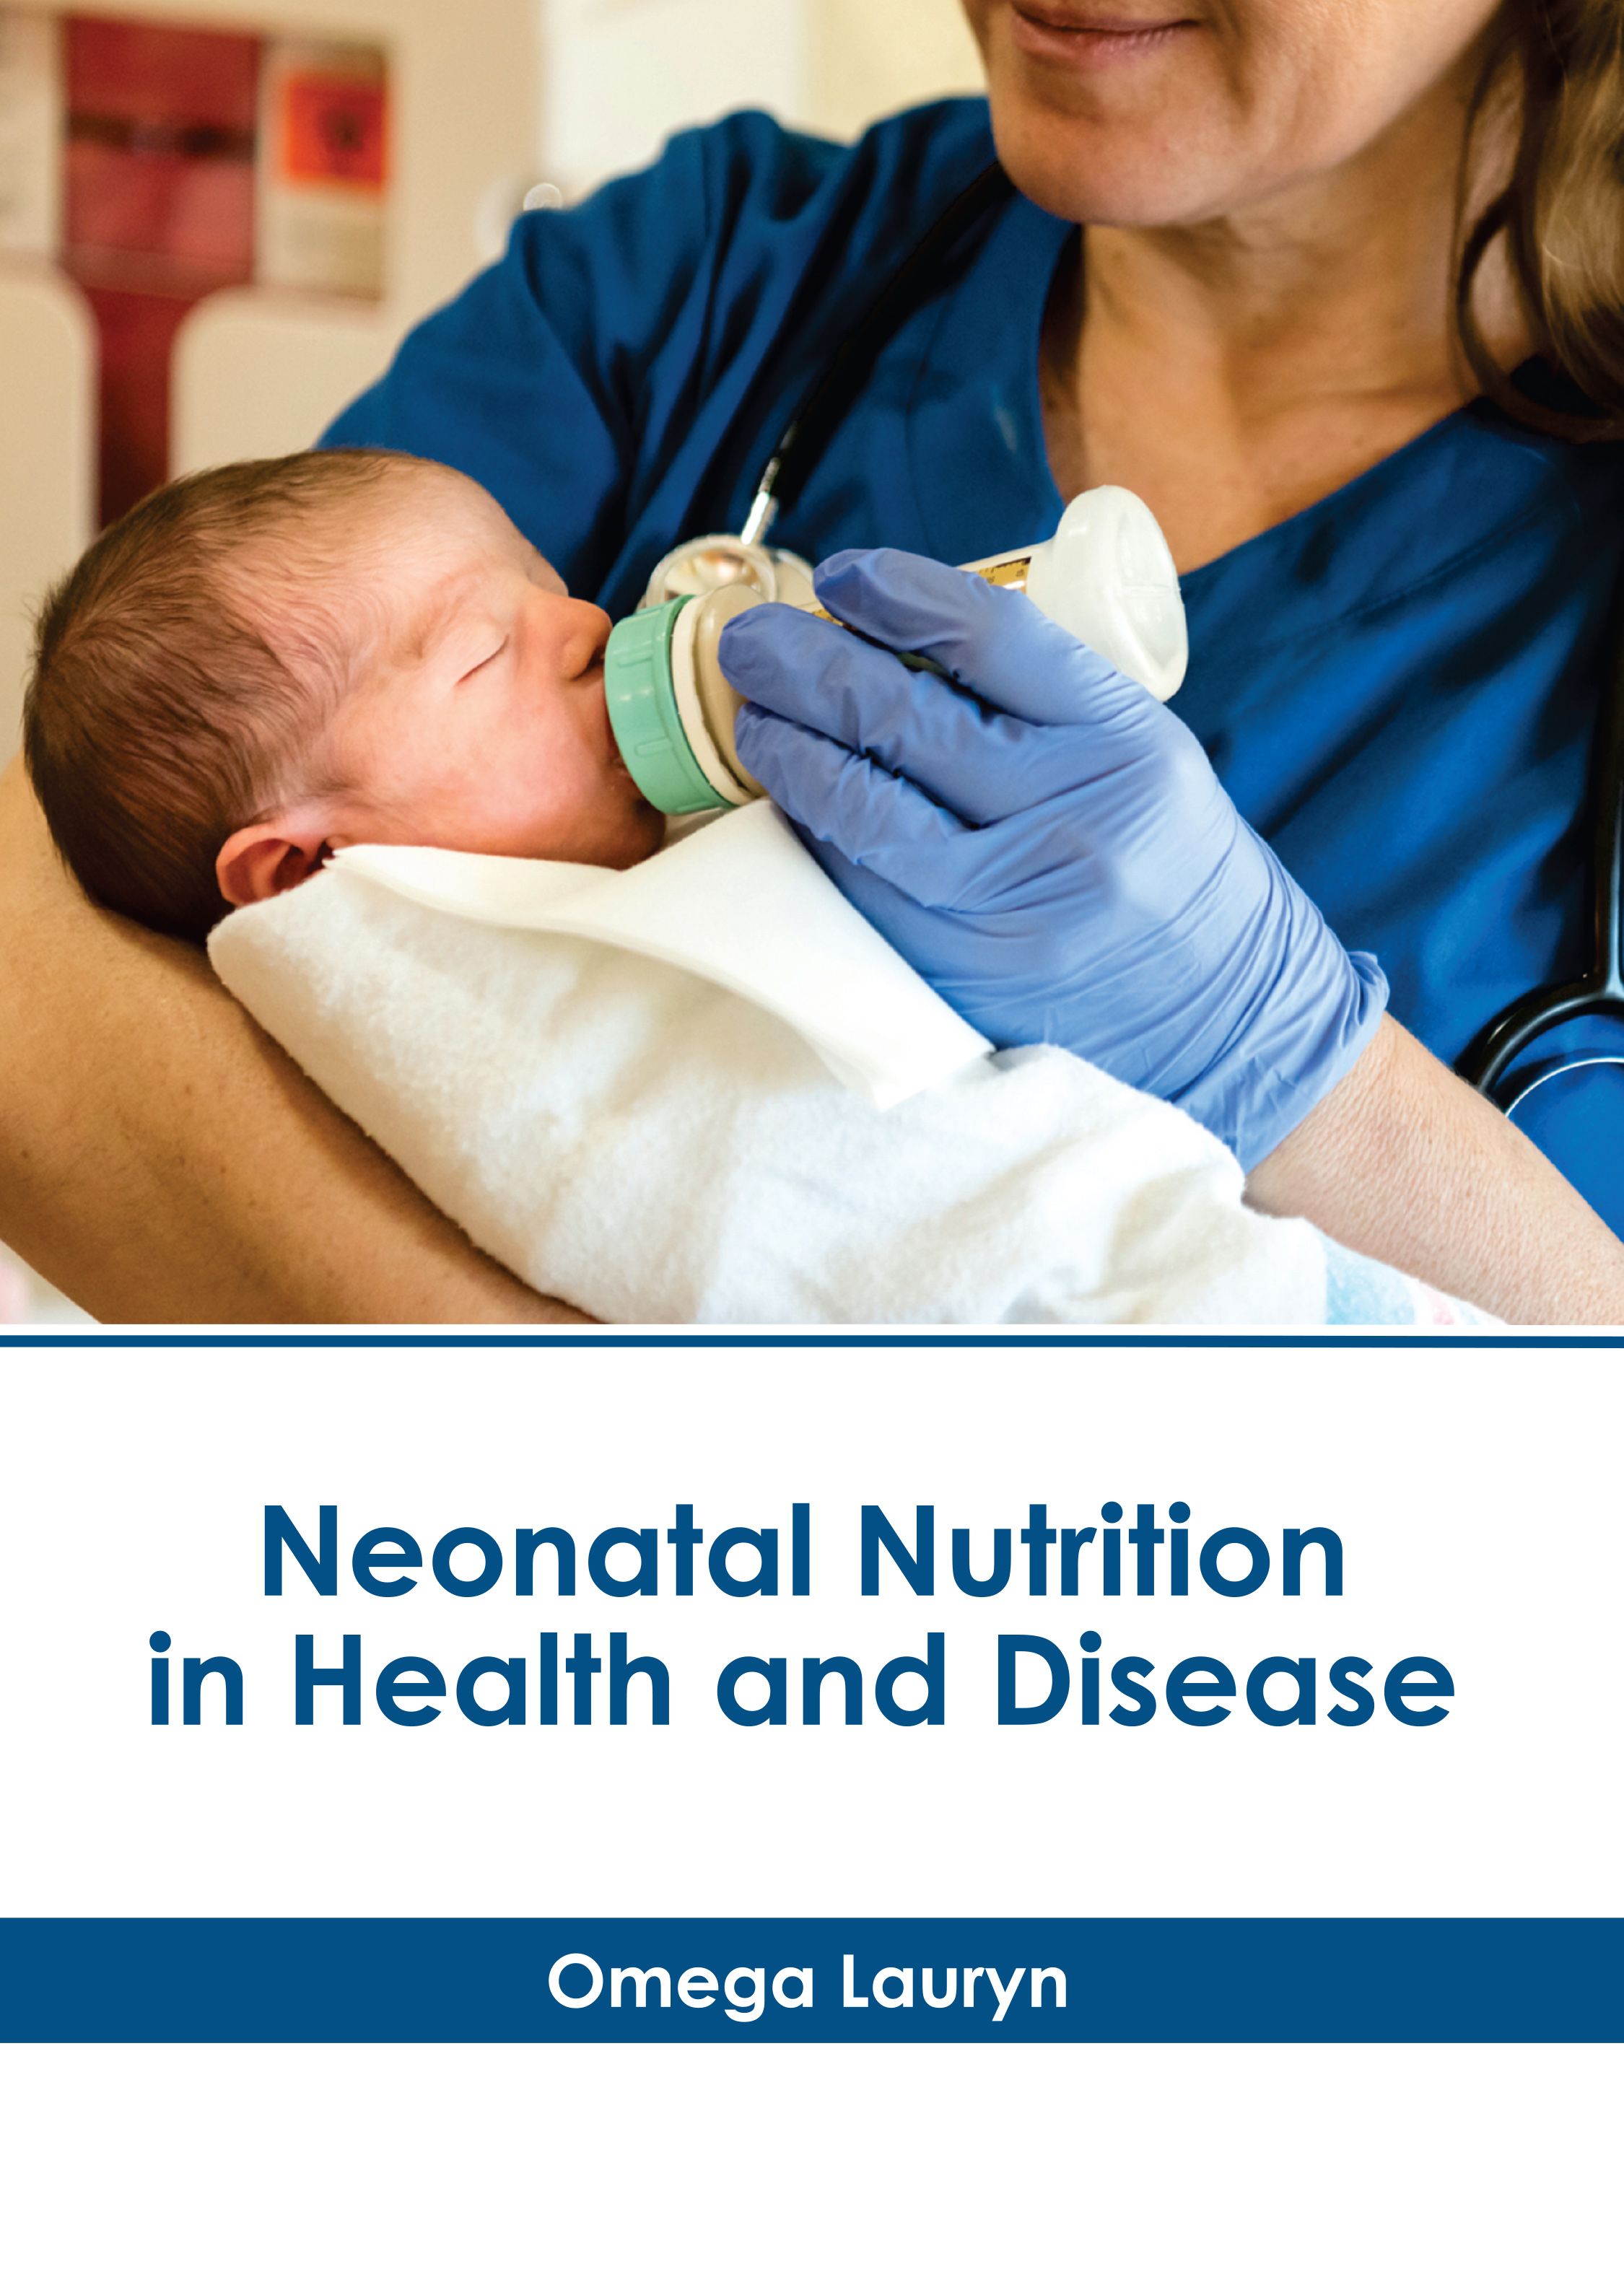 

exclusive-publishers/american-medical-publishers/neonatal-nutrition-in-health-and-disease-9781639277452